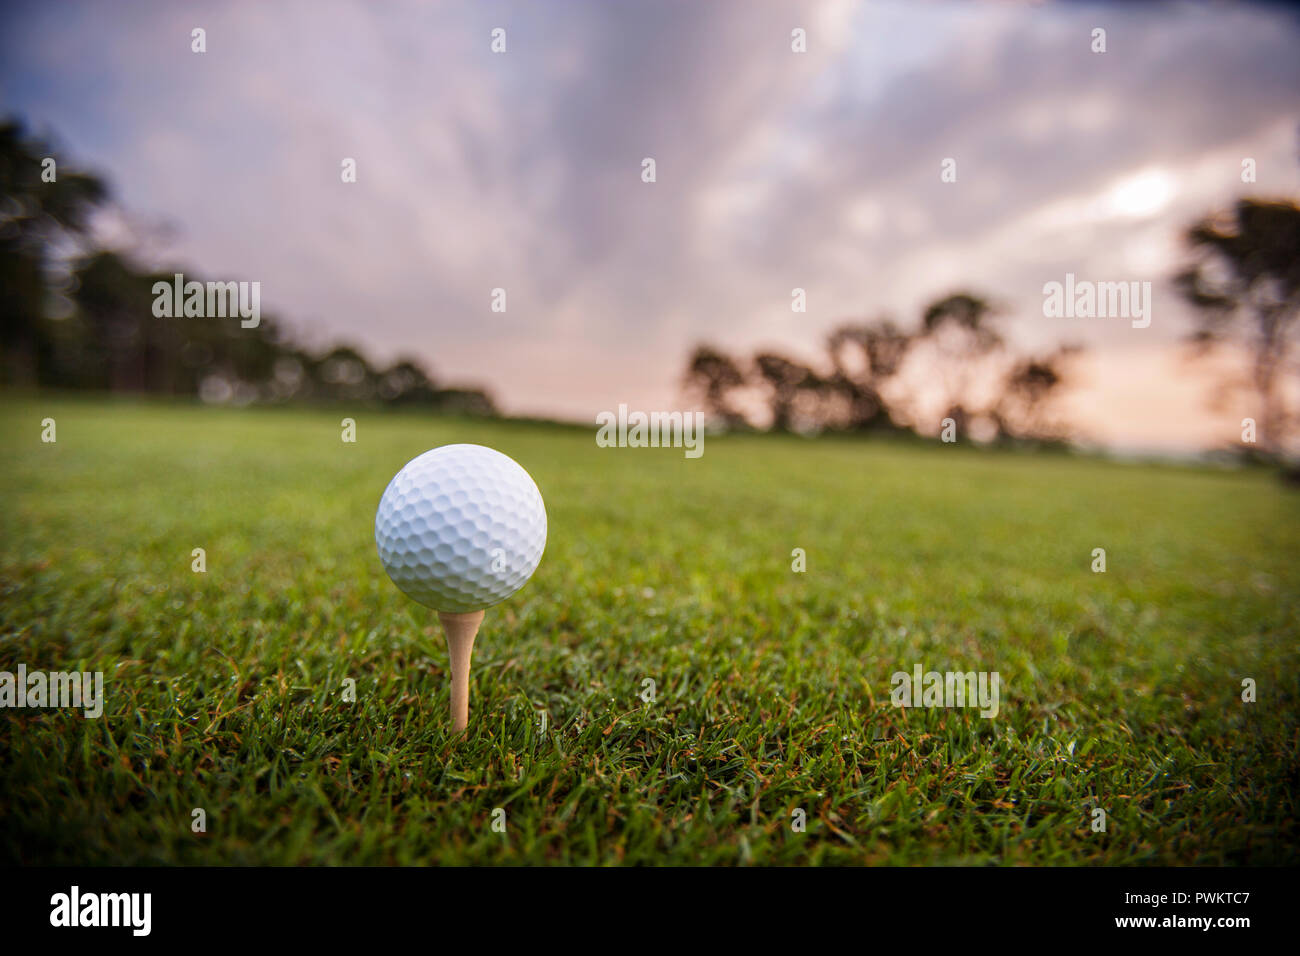 Golf ball sitting on a tee on smooth grass under a cloudy glowing sky. Stock Photo